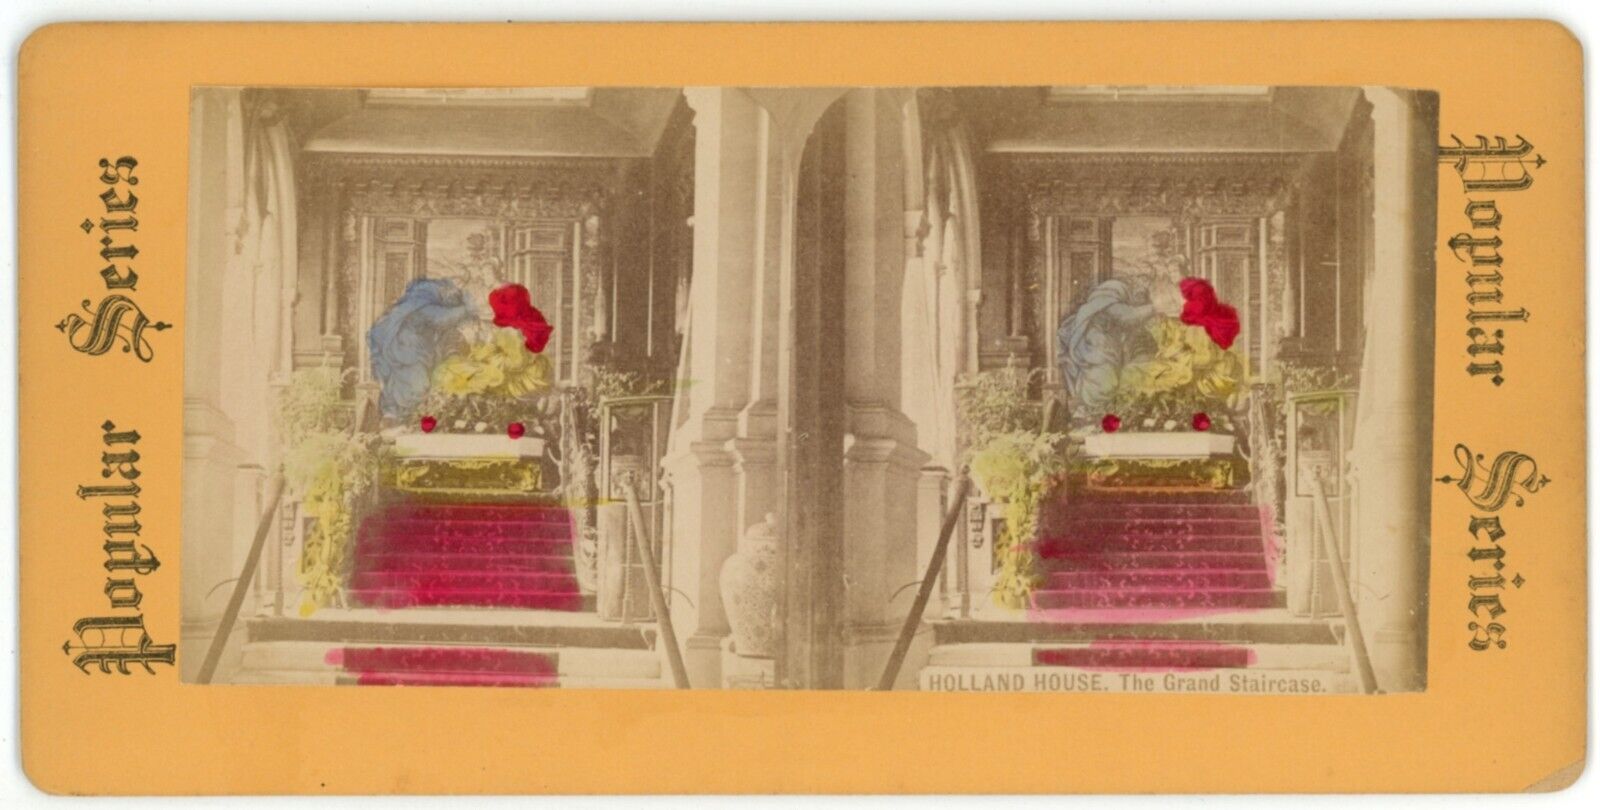 c1900's Colorized Stereoview Card Holland House, The Grand Staircase